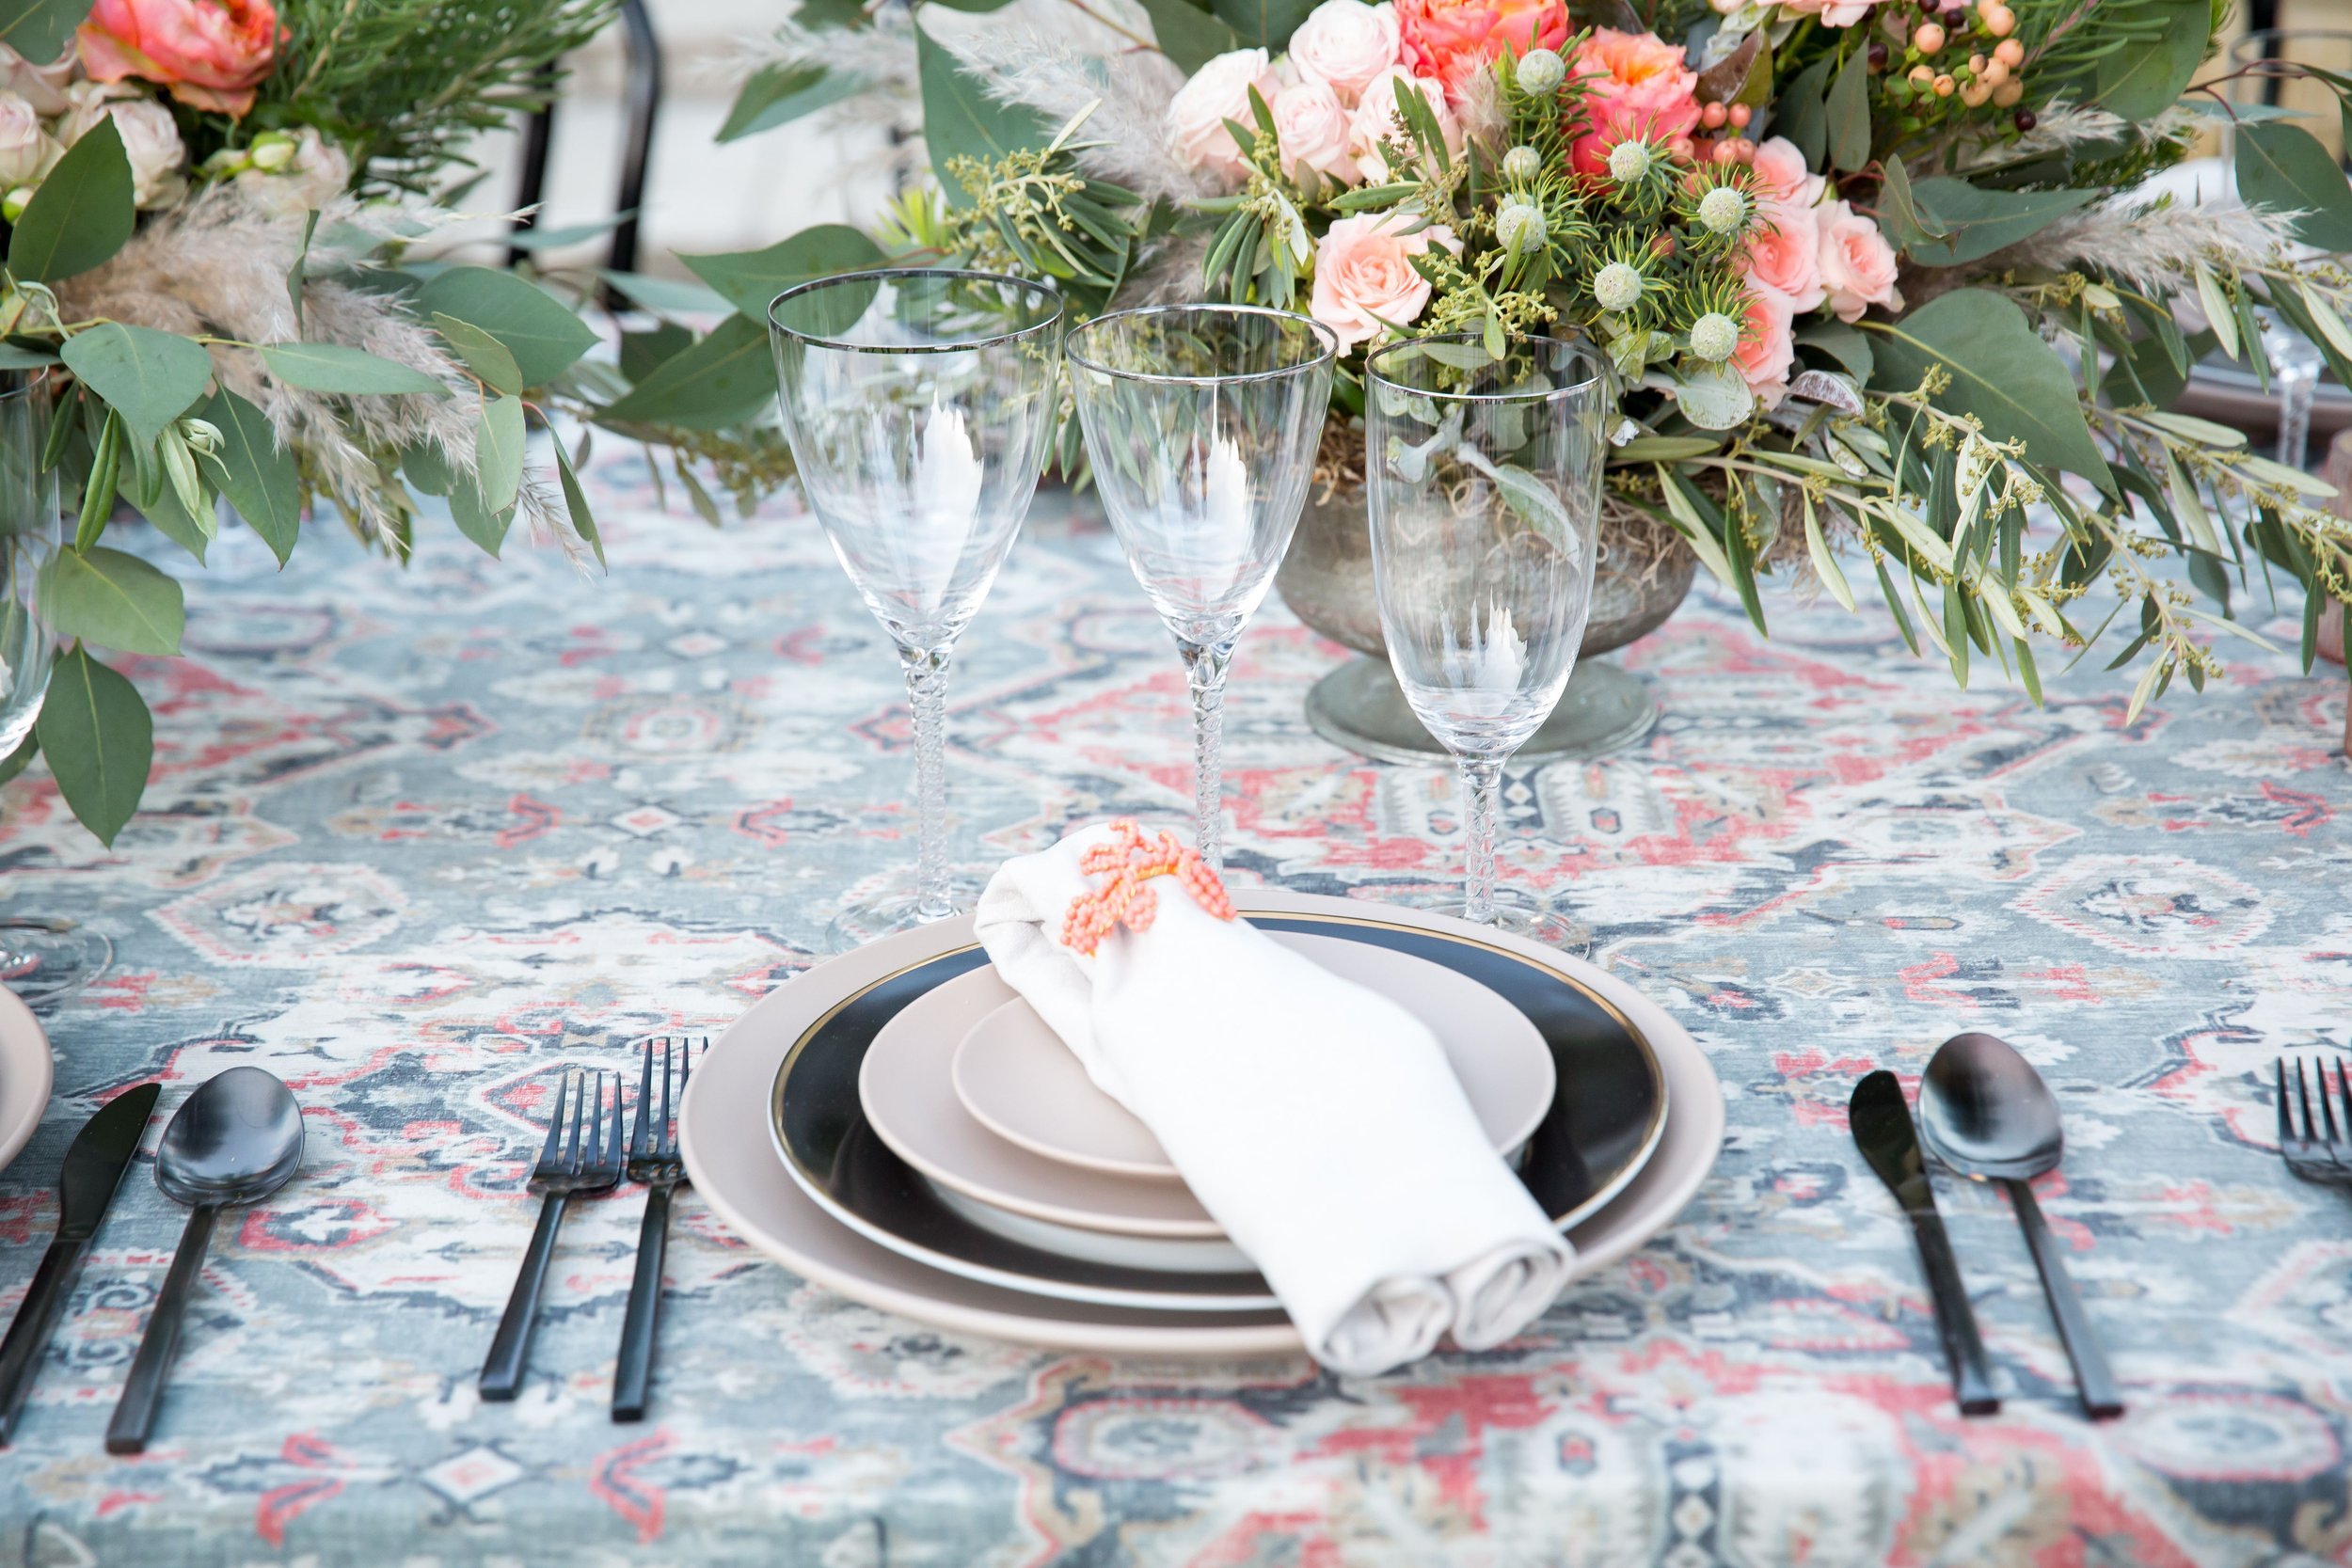 www.santabarbarawedding.com | Bright Event Rentals | Vanity Portrait Studio | Place Setting with Black and White Plates and Black Silverware on a Patterned Tablecloth